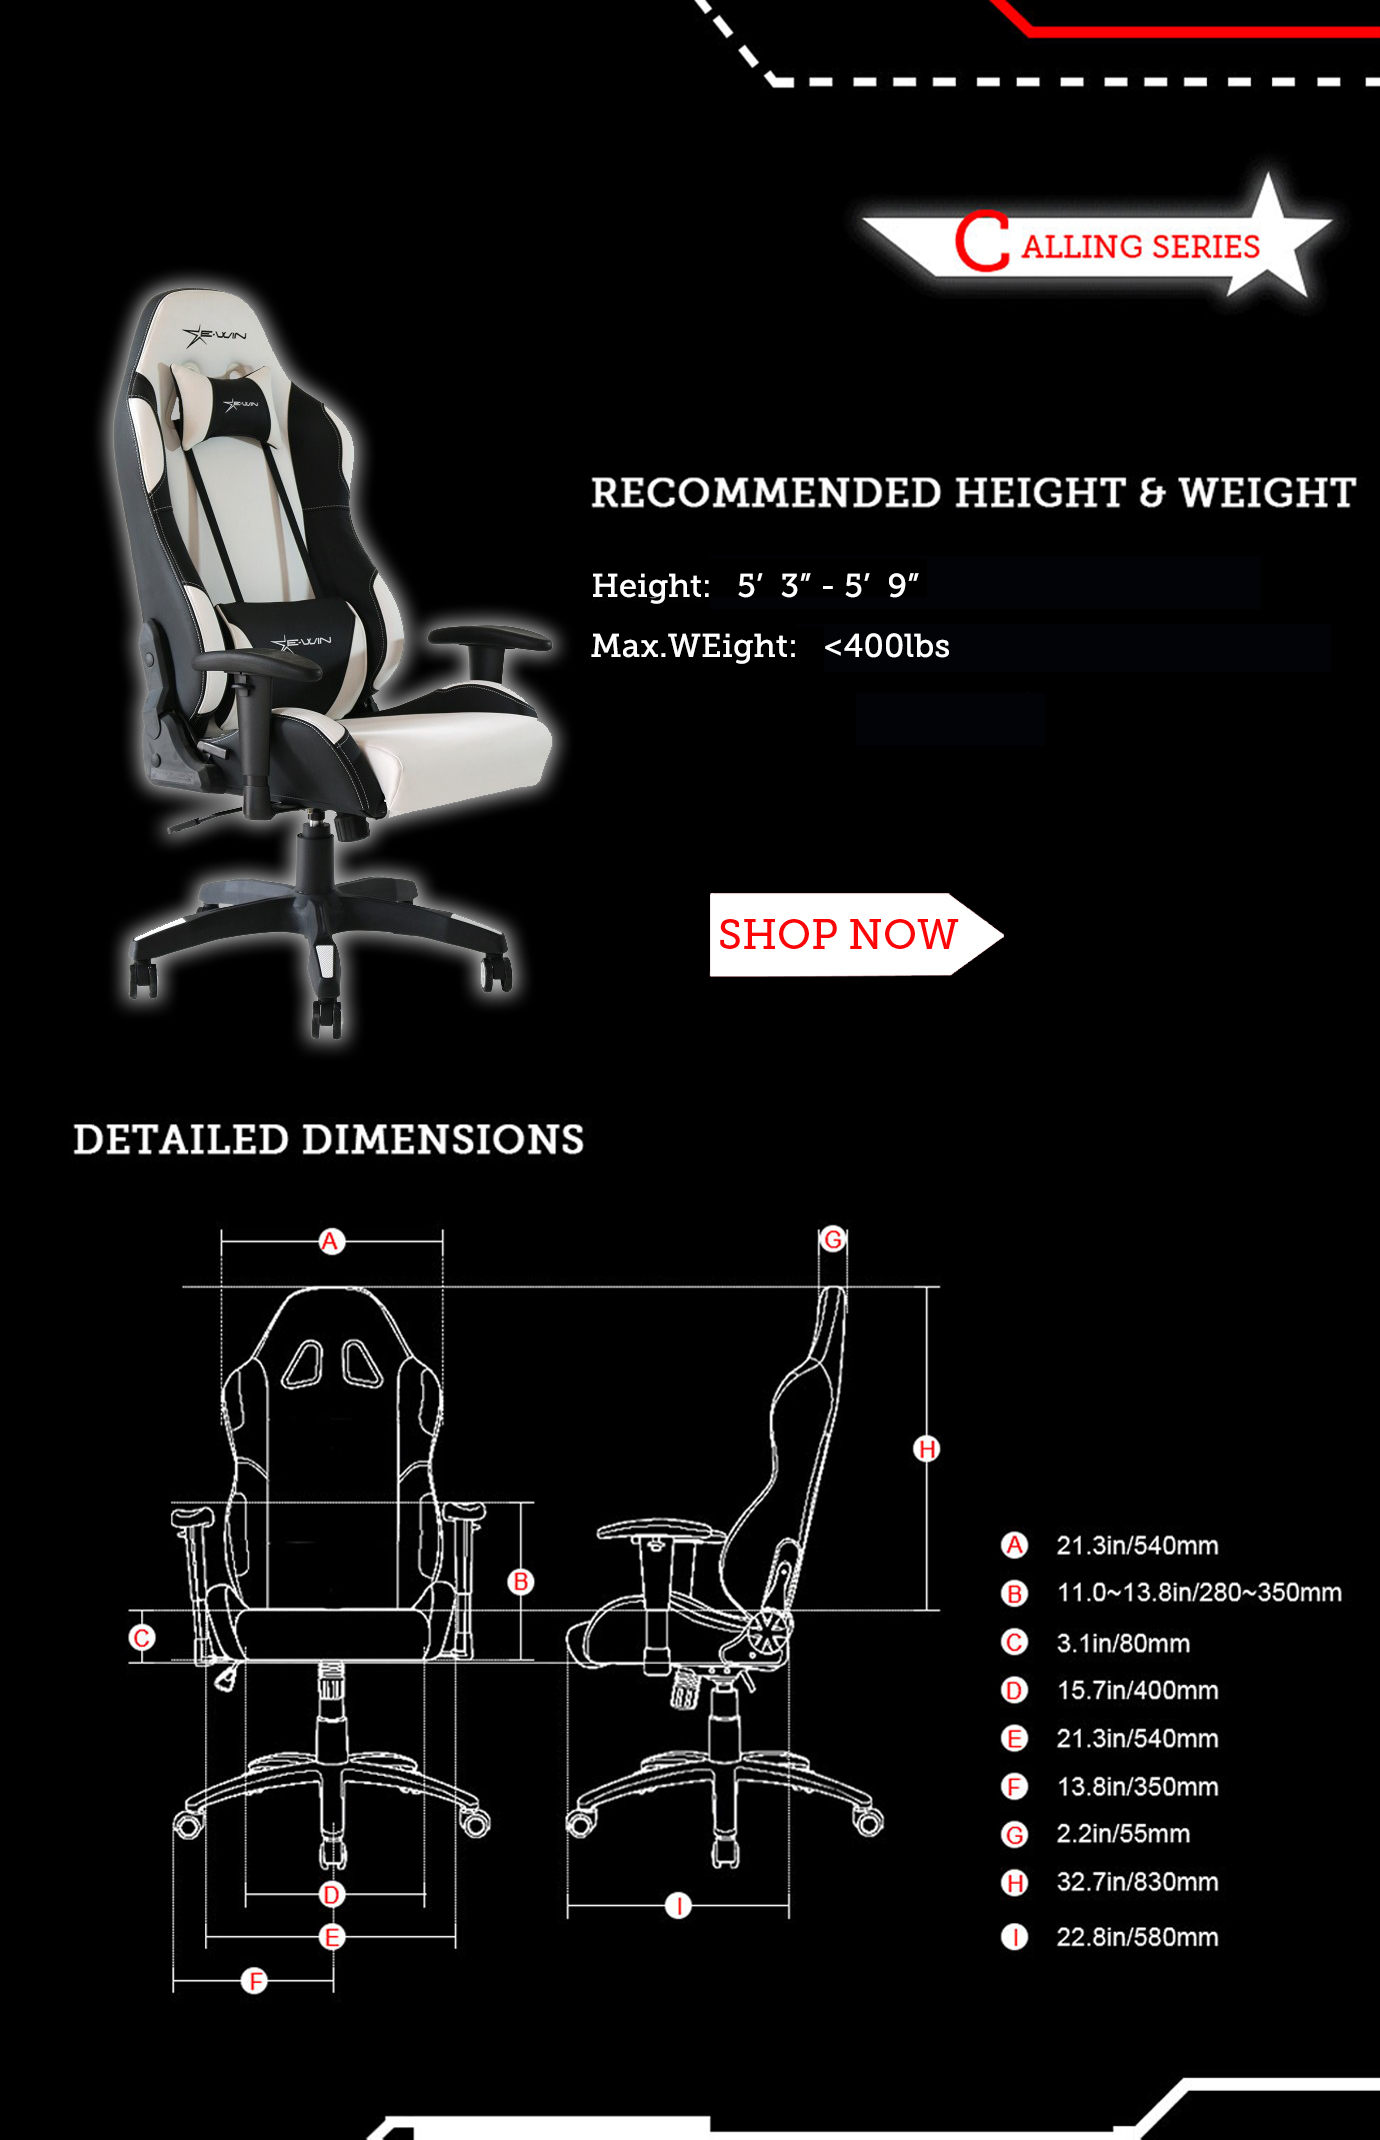 Dimensions of E-WIN Calling Series Gaming Chairs